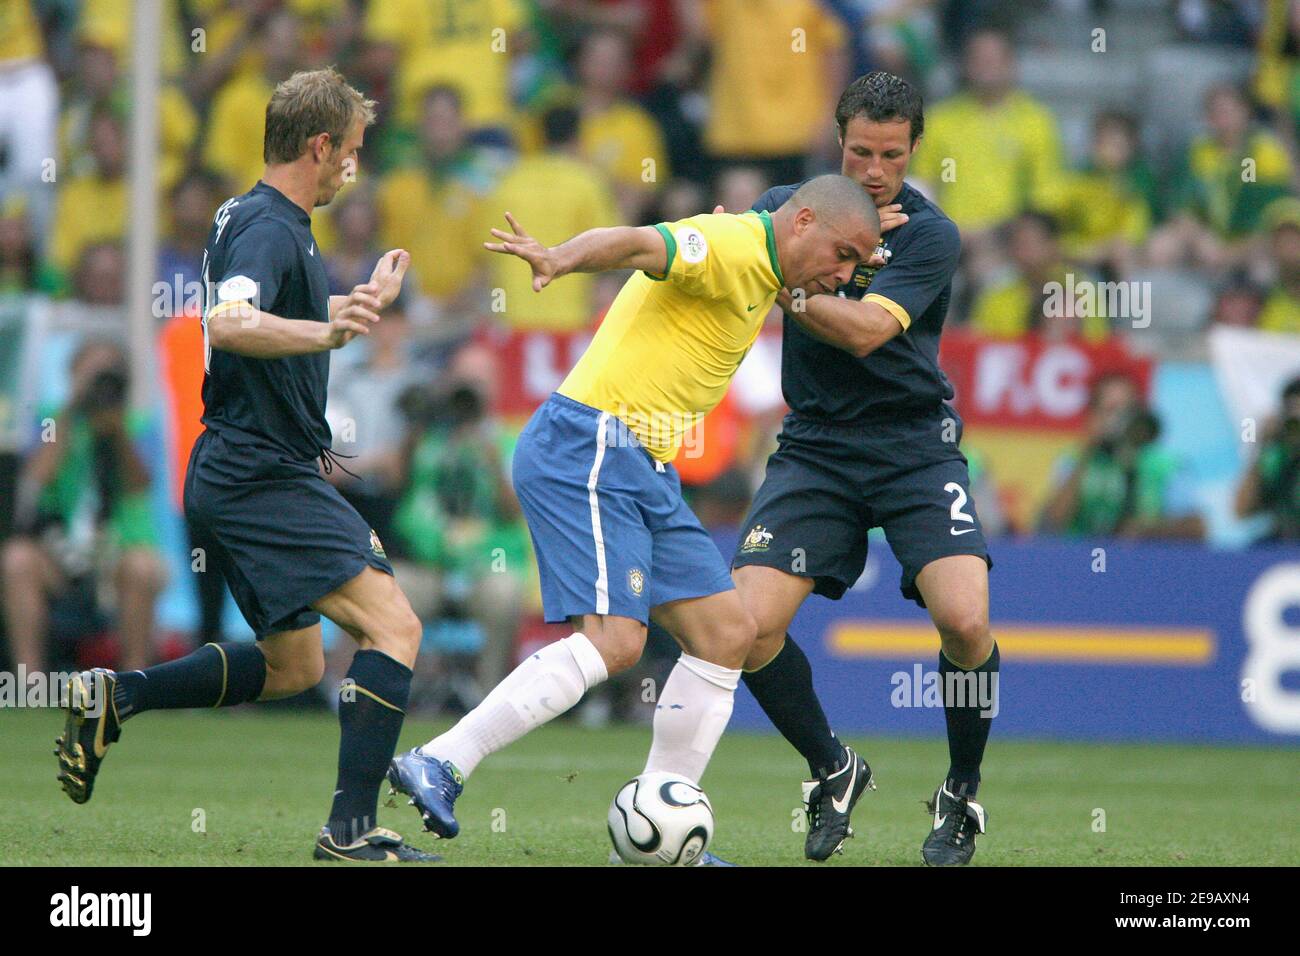 Brazil's Ronaldo during the World Cup 2006, Group F, Brazil vs Australia at the Allianz-Arena stadium in Munich, Germany on Une 18, 2006. Brazil won 2-0. Photo by Gouhier-Hahn-Orban/Cameleon/ABACAPRESS.COM Stock Photo